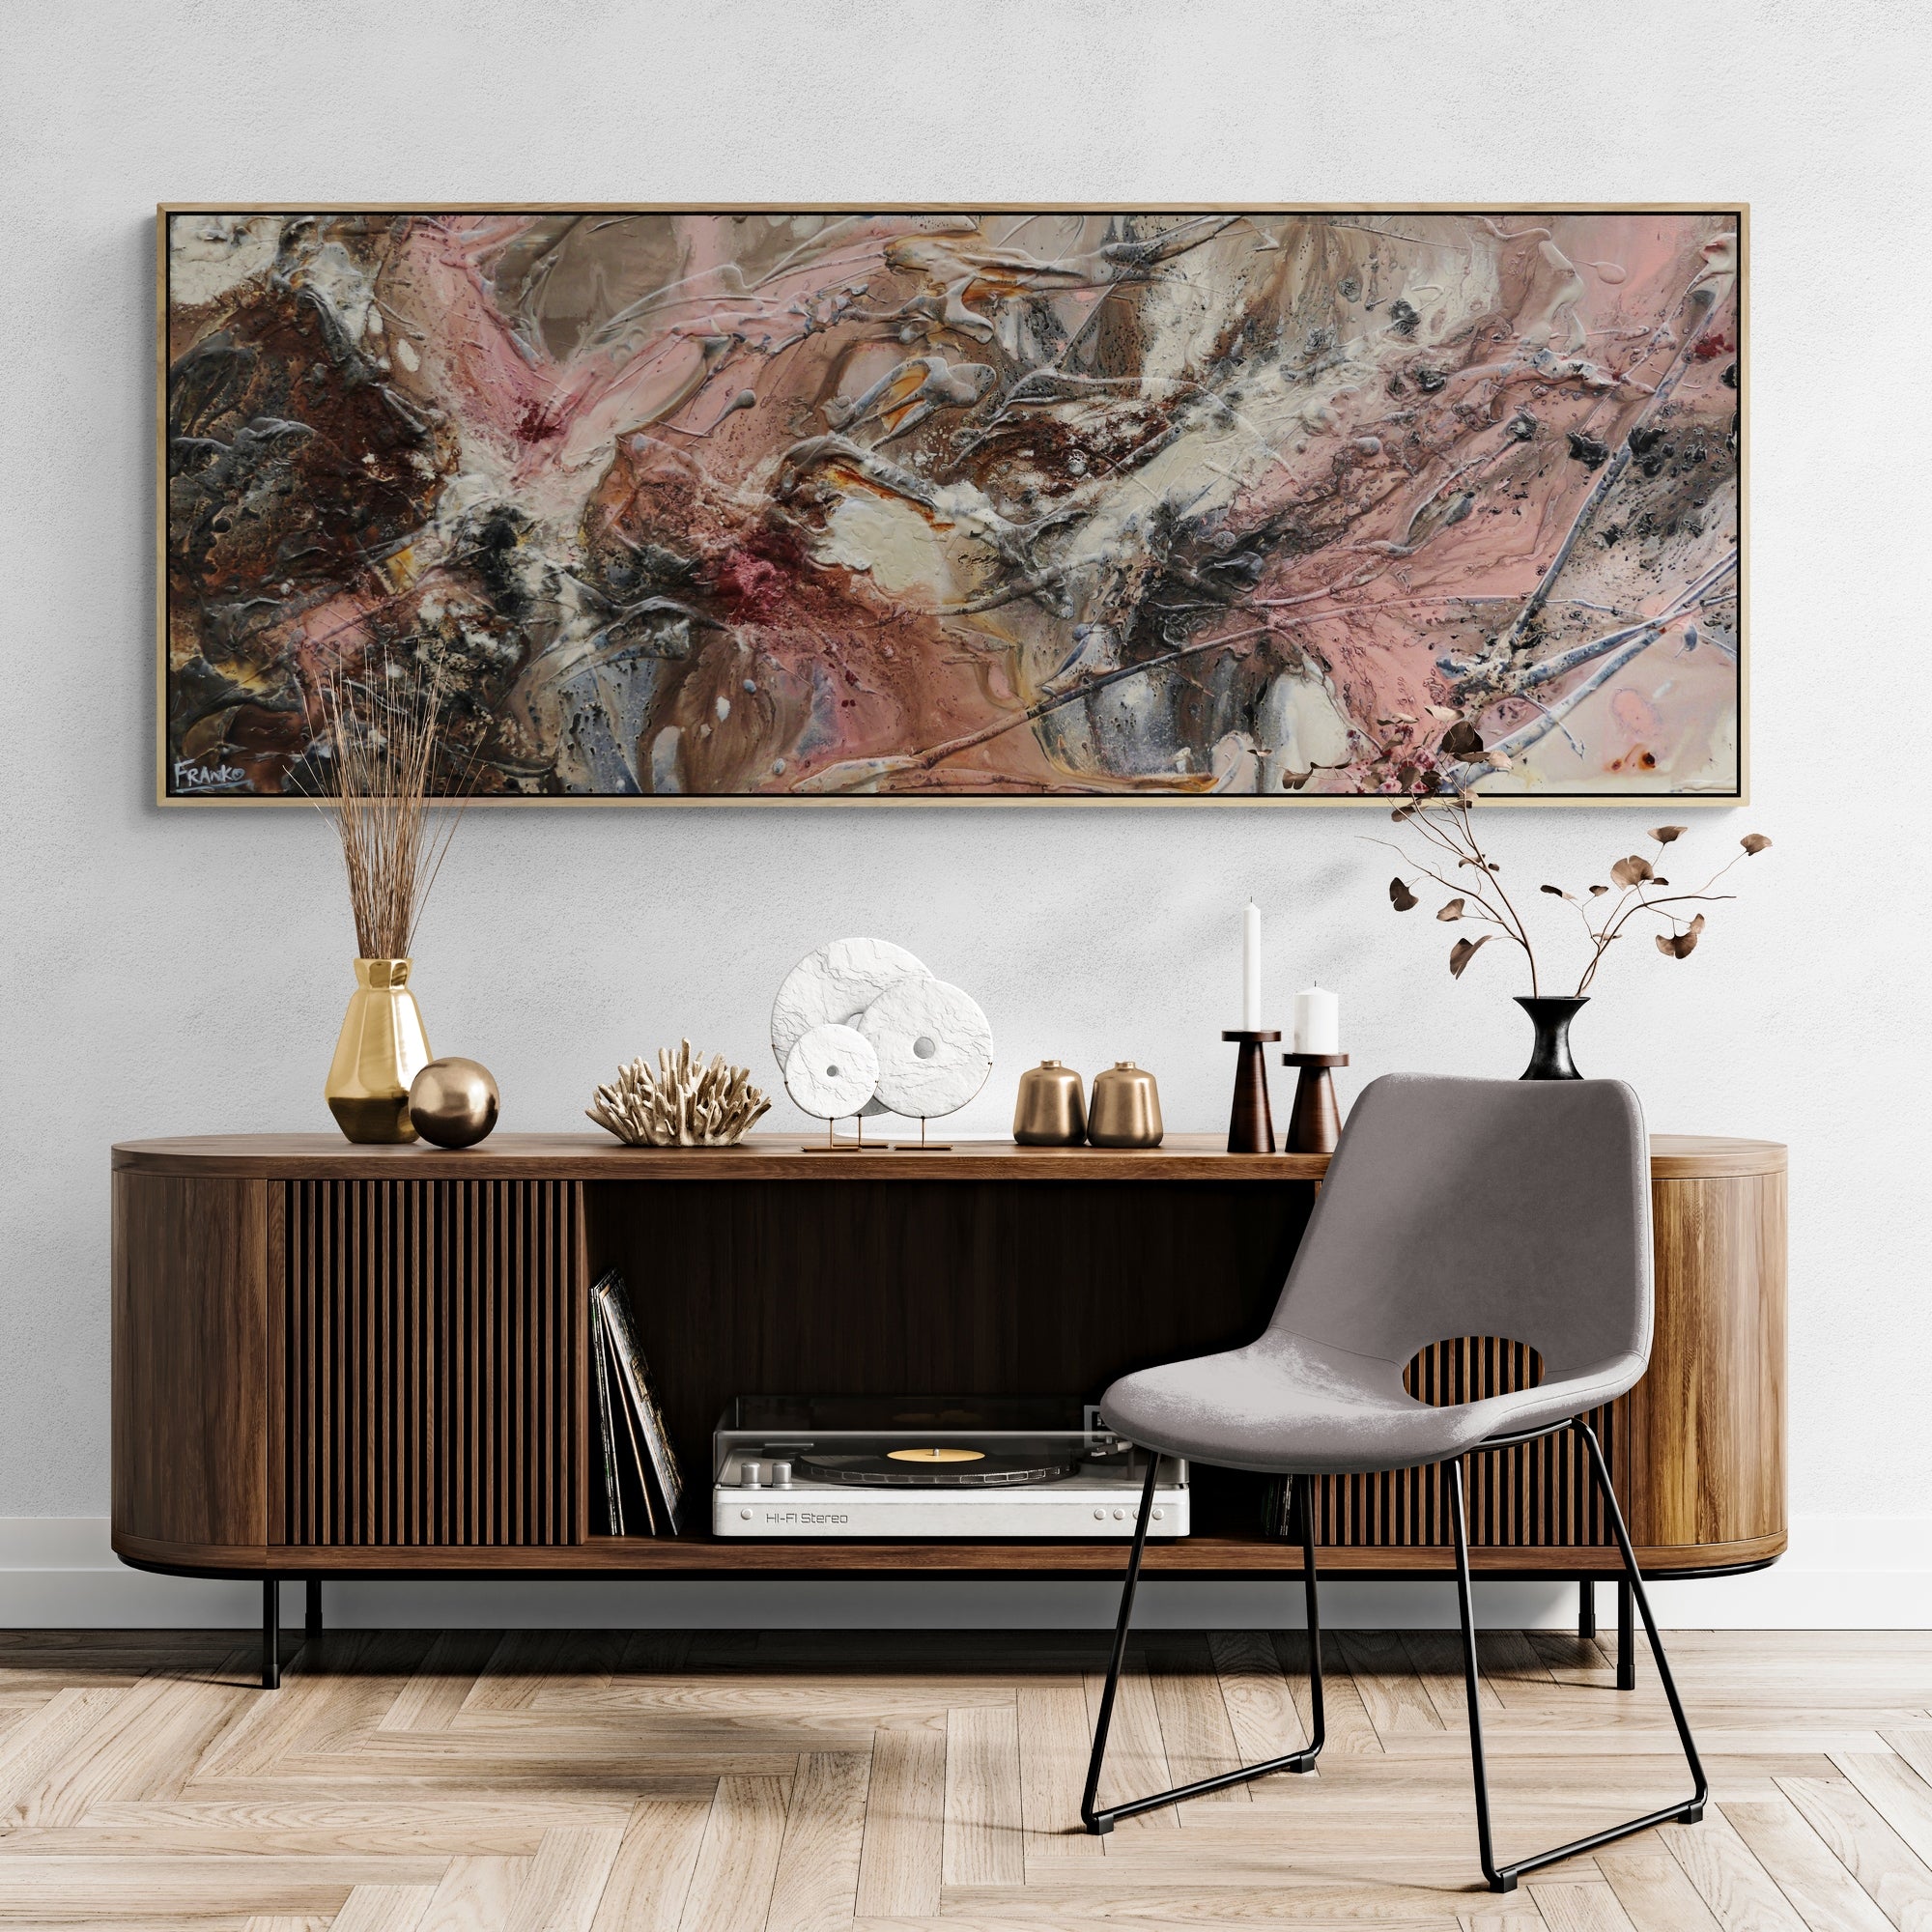 Musk 160cm x 60cm Grey Musk Rusts Textured Abstract Painting (SOLD)